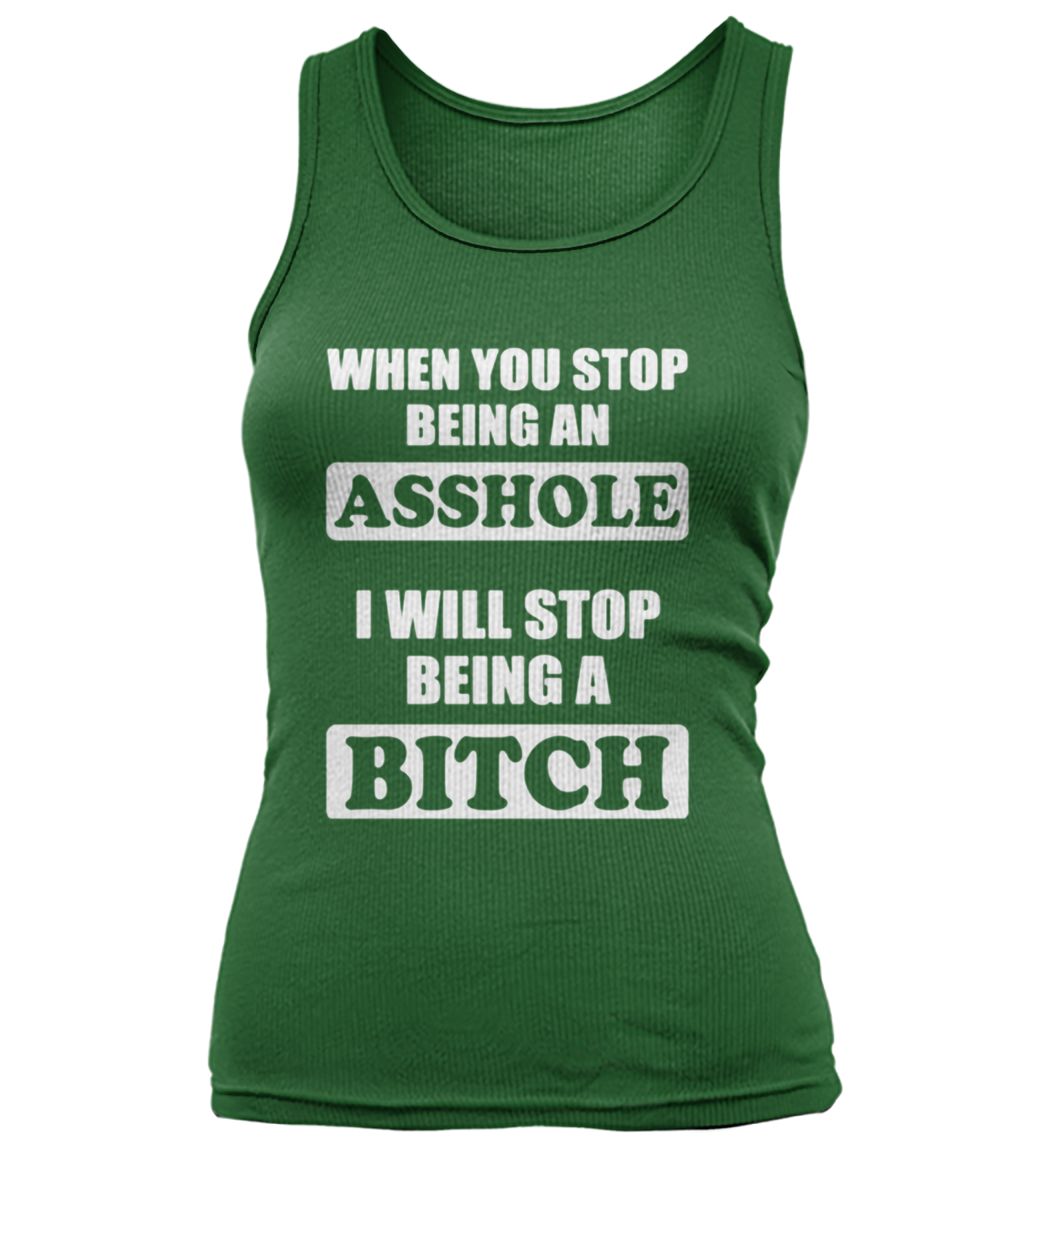 When you stop being an asshole I will stop being bitch women's tank top